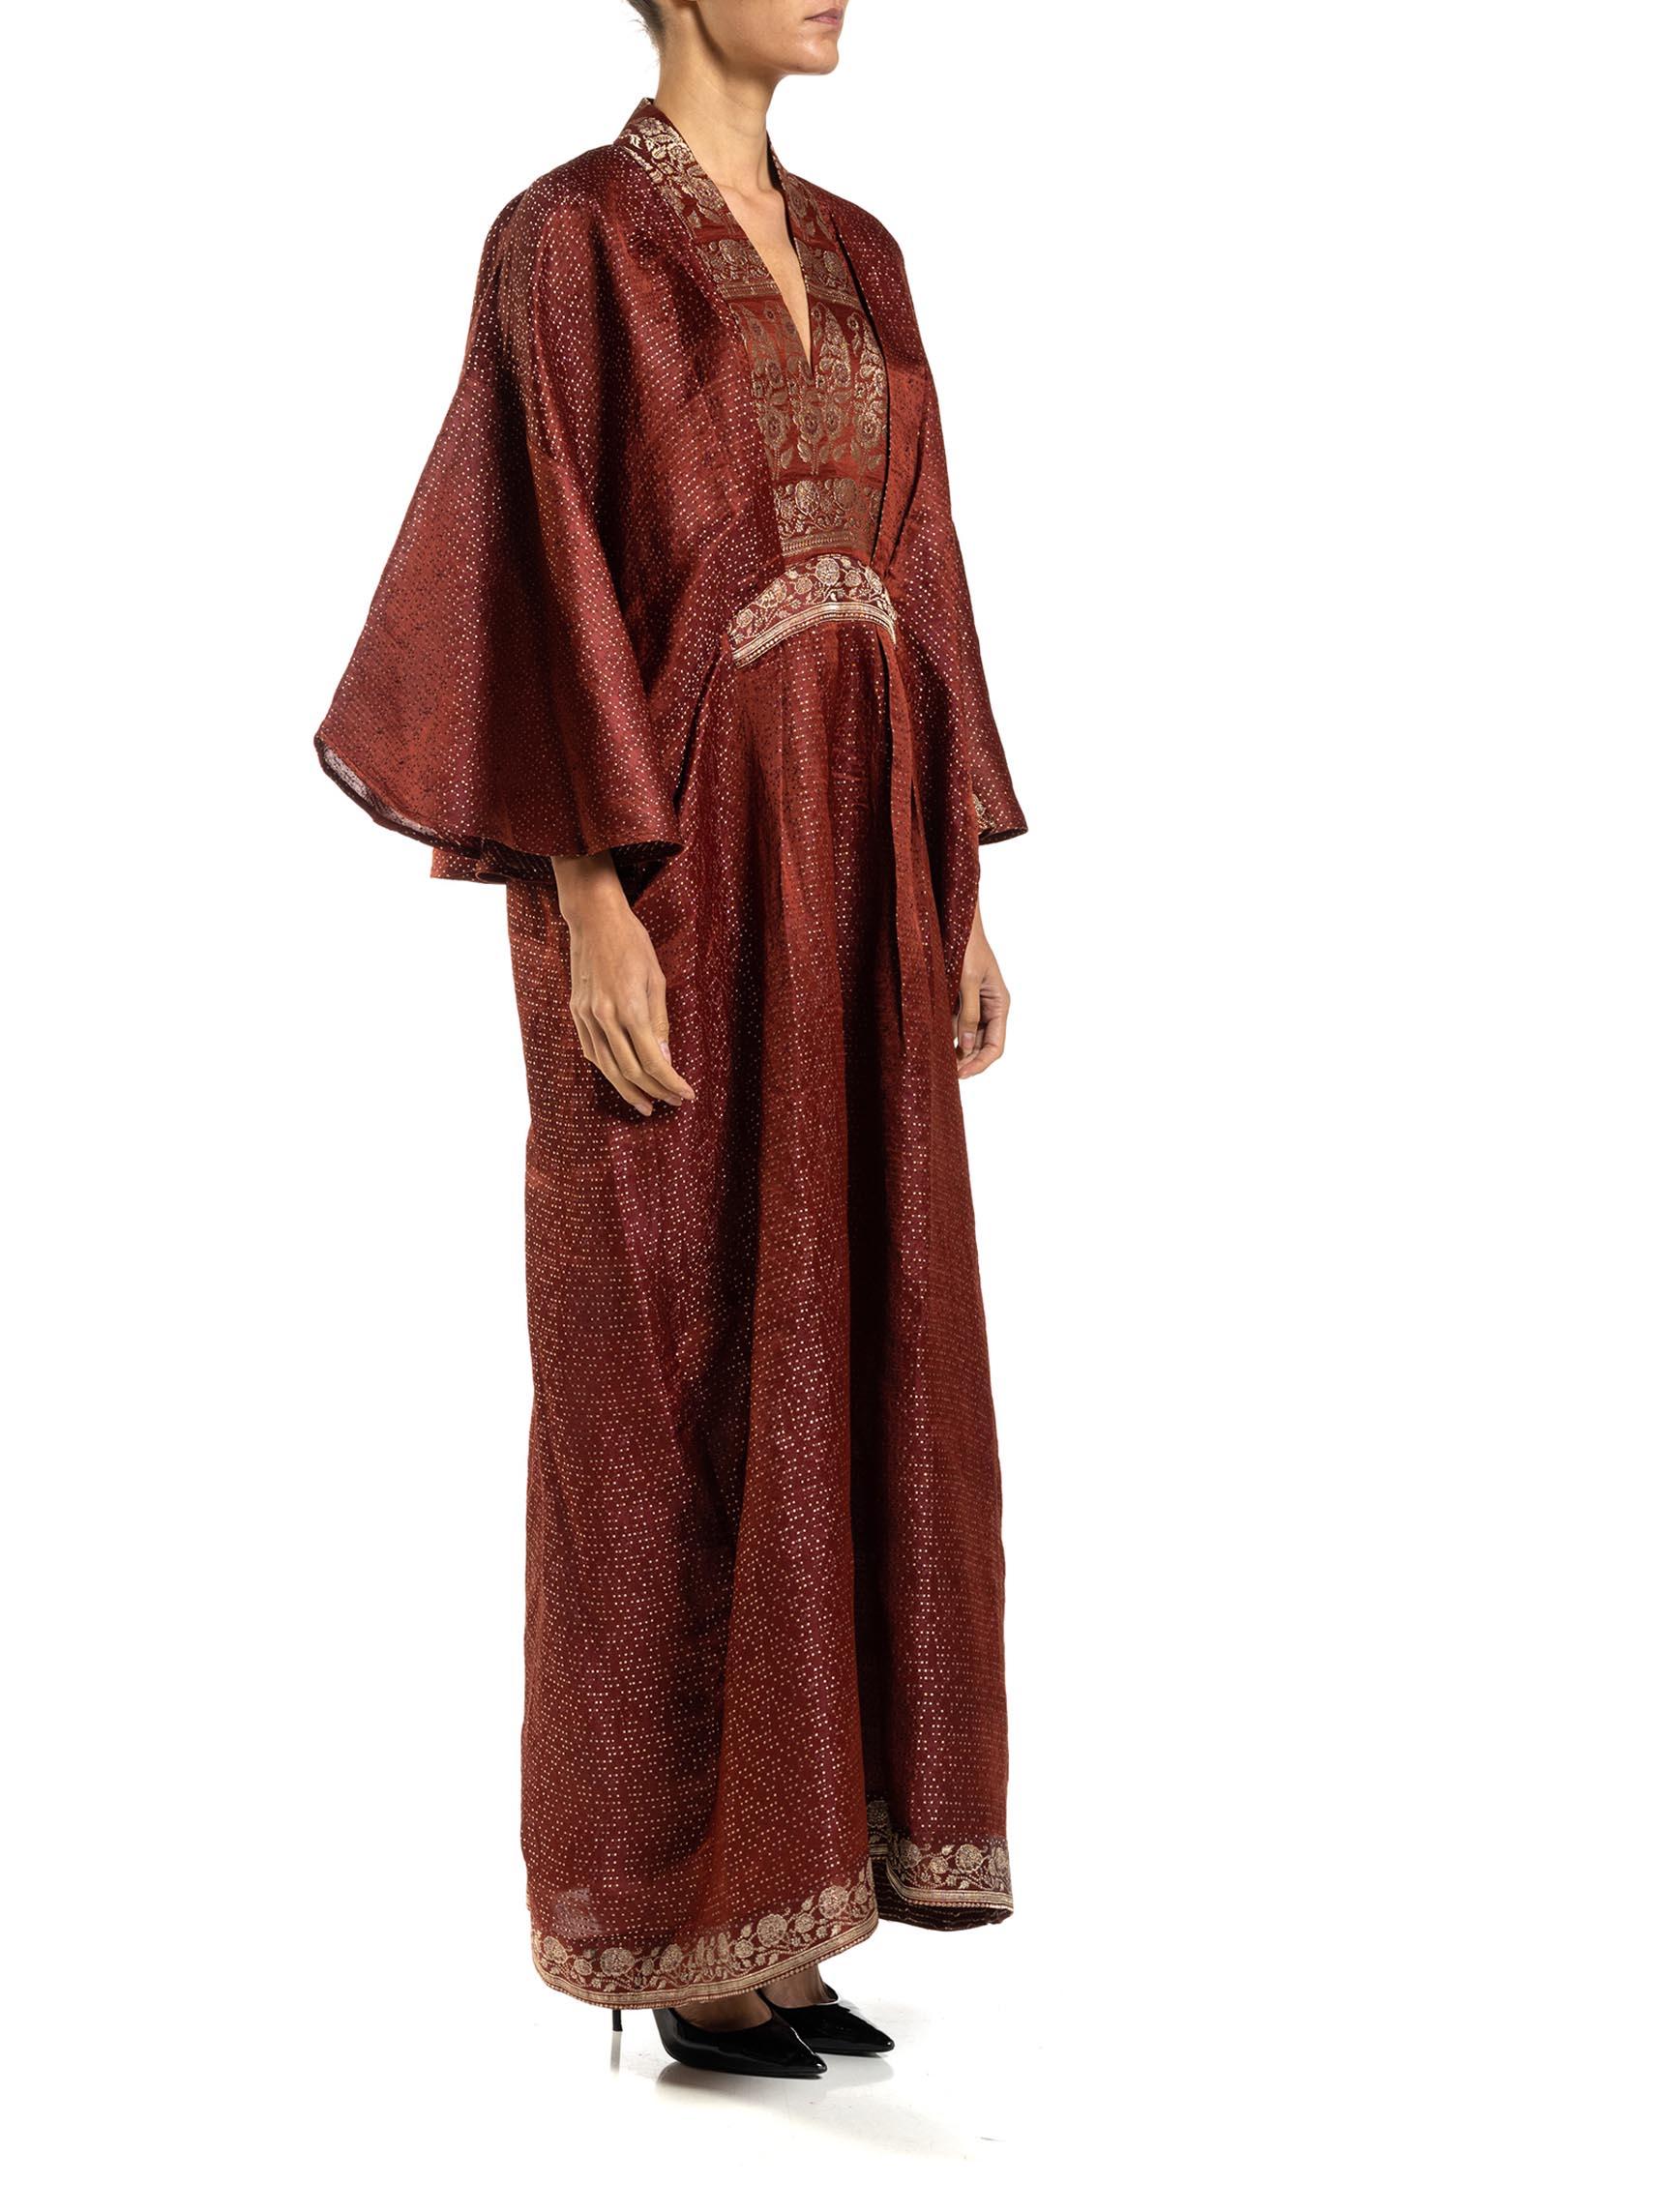 MORPHEW COLLECTION Burgundy Floral Silk Checkered Kaftan Made From Vintage Sari For Sale 4